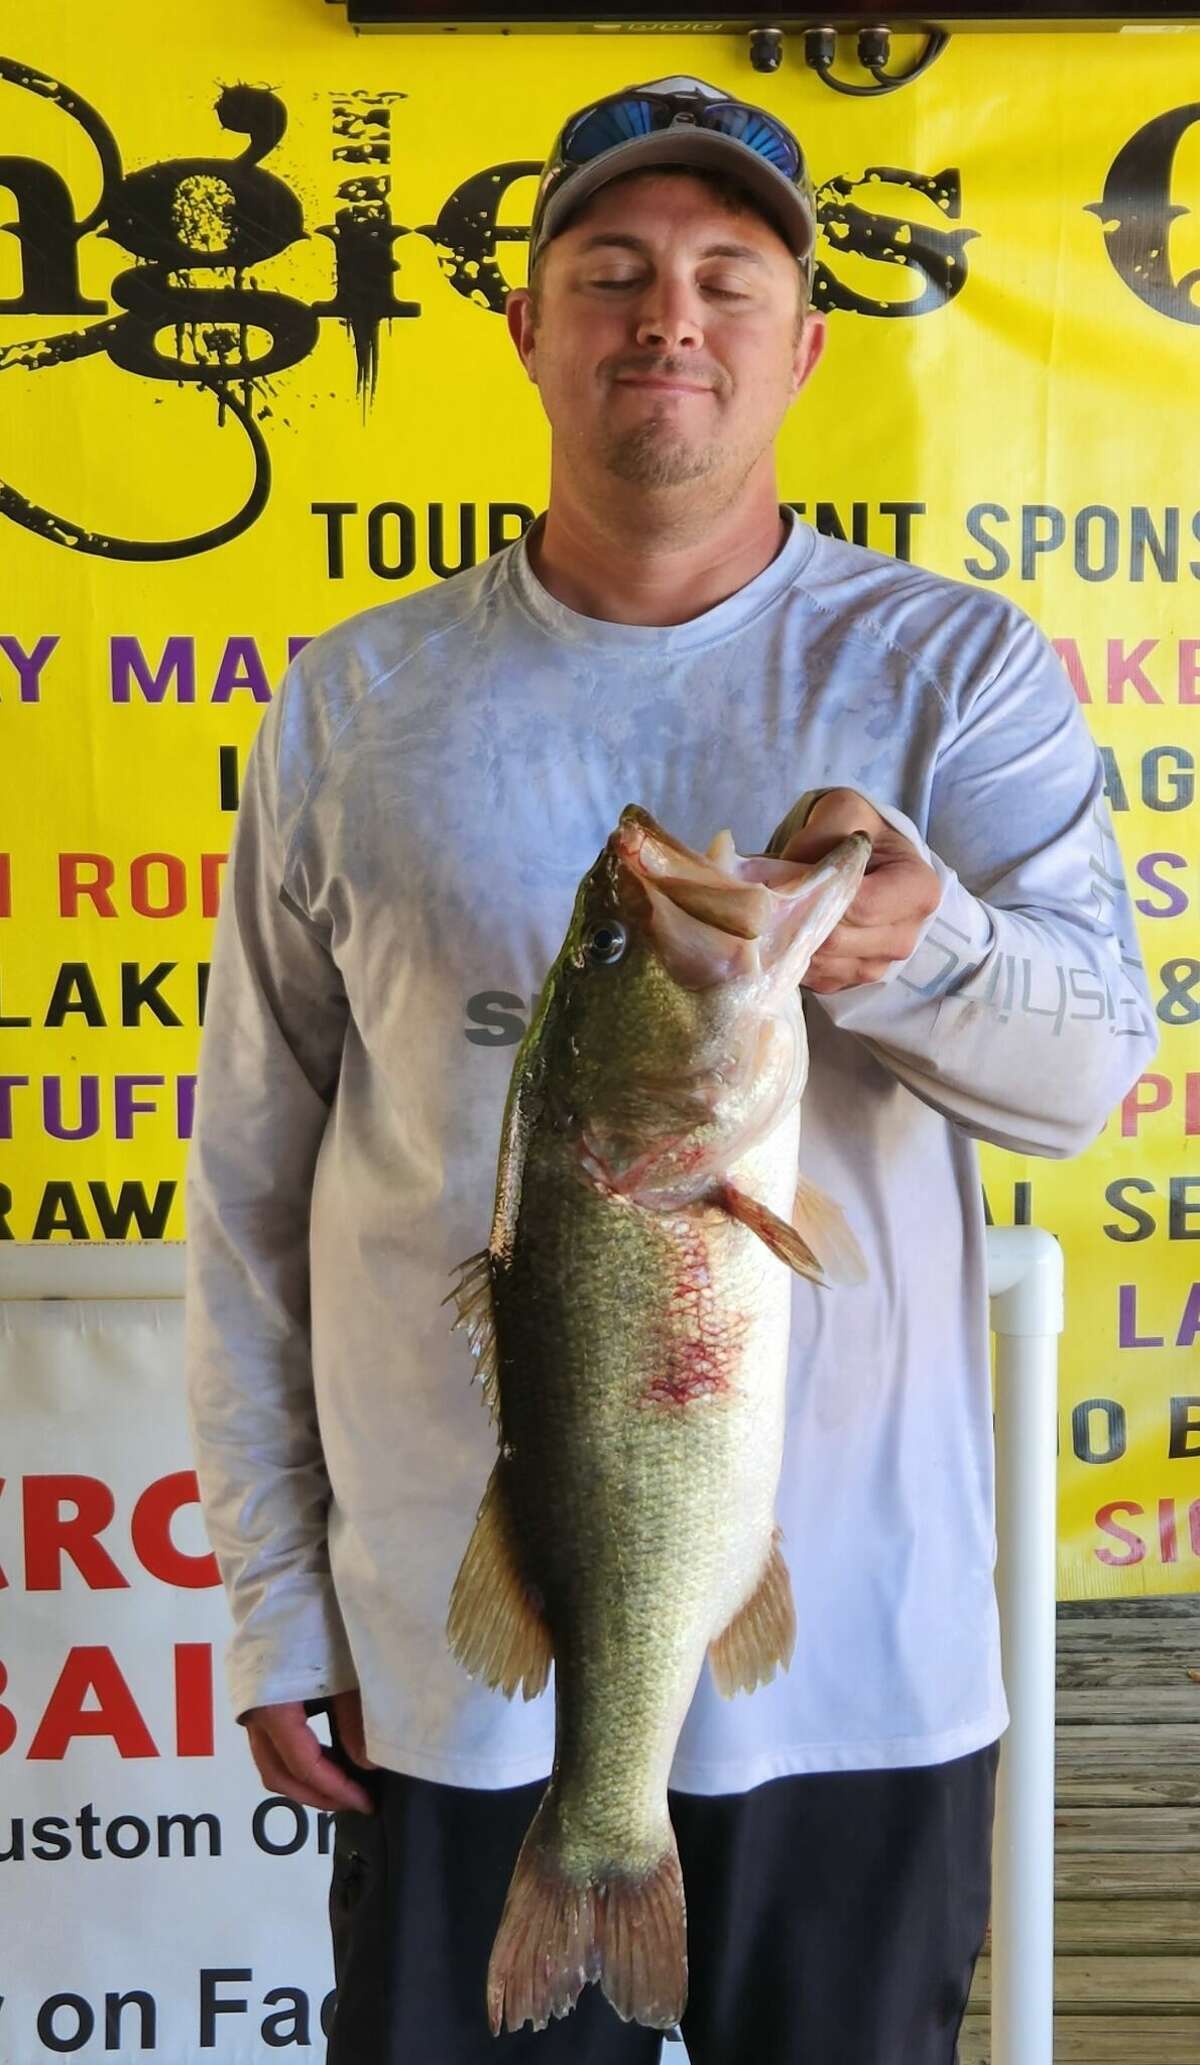 Kyle Nitschke and Ben Pope came in third in the Anglers Quest Team Championship with a total weight up 29.23 pounds.